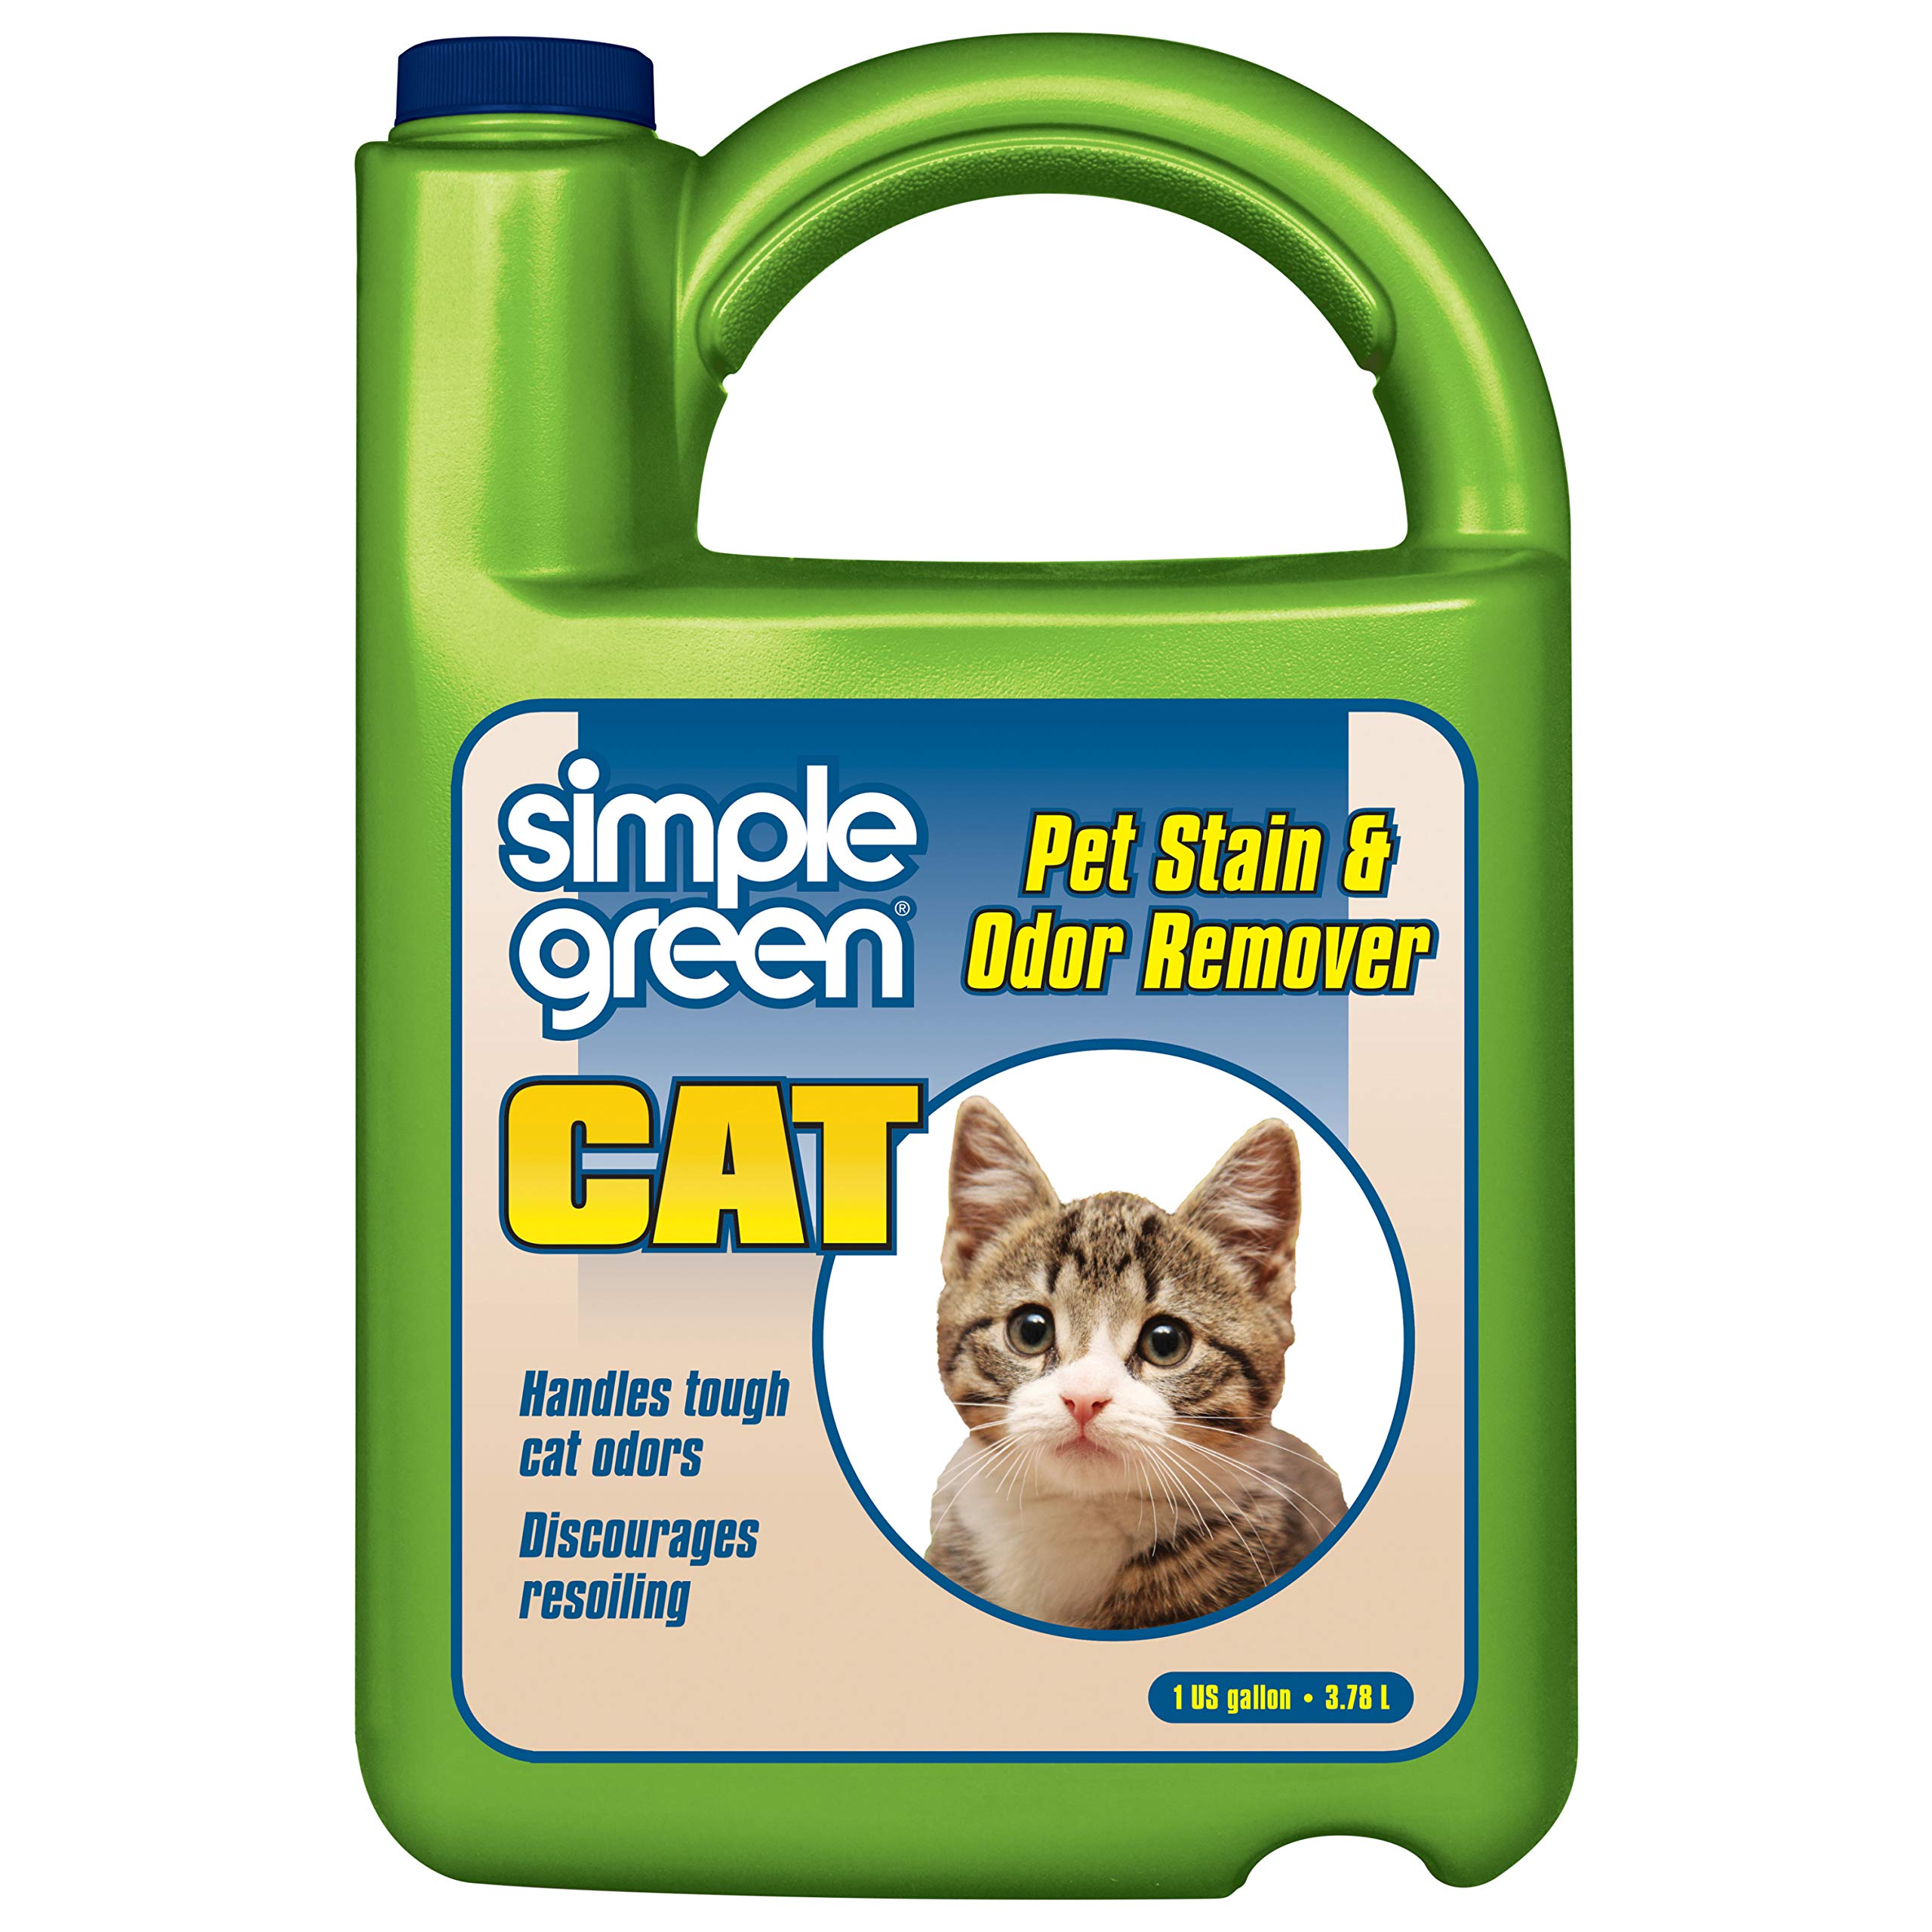 simple green cat Stain & Odor Remover - Enzyme cleaner for cat Urine, Feces, Blood, Vomit (1 gallon Refill)